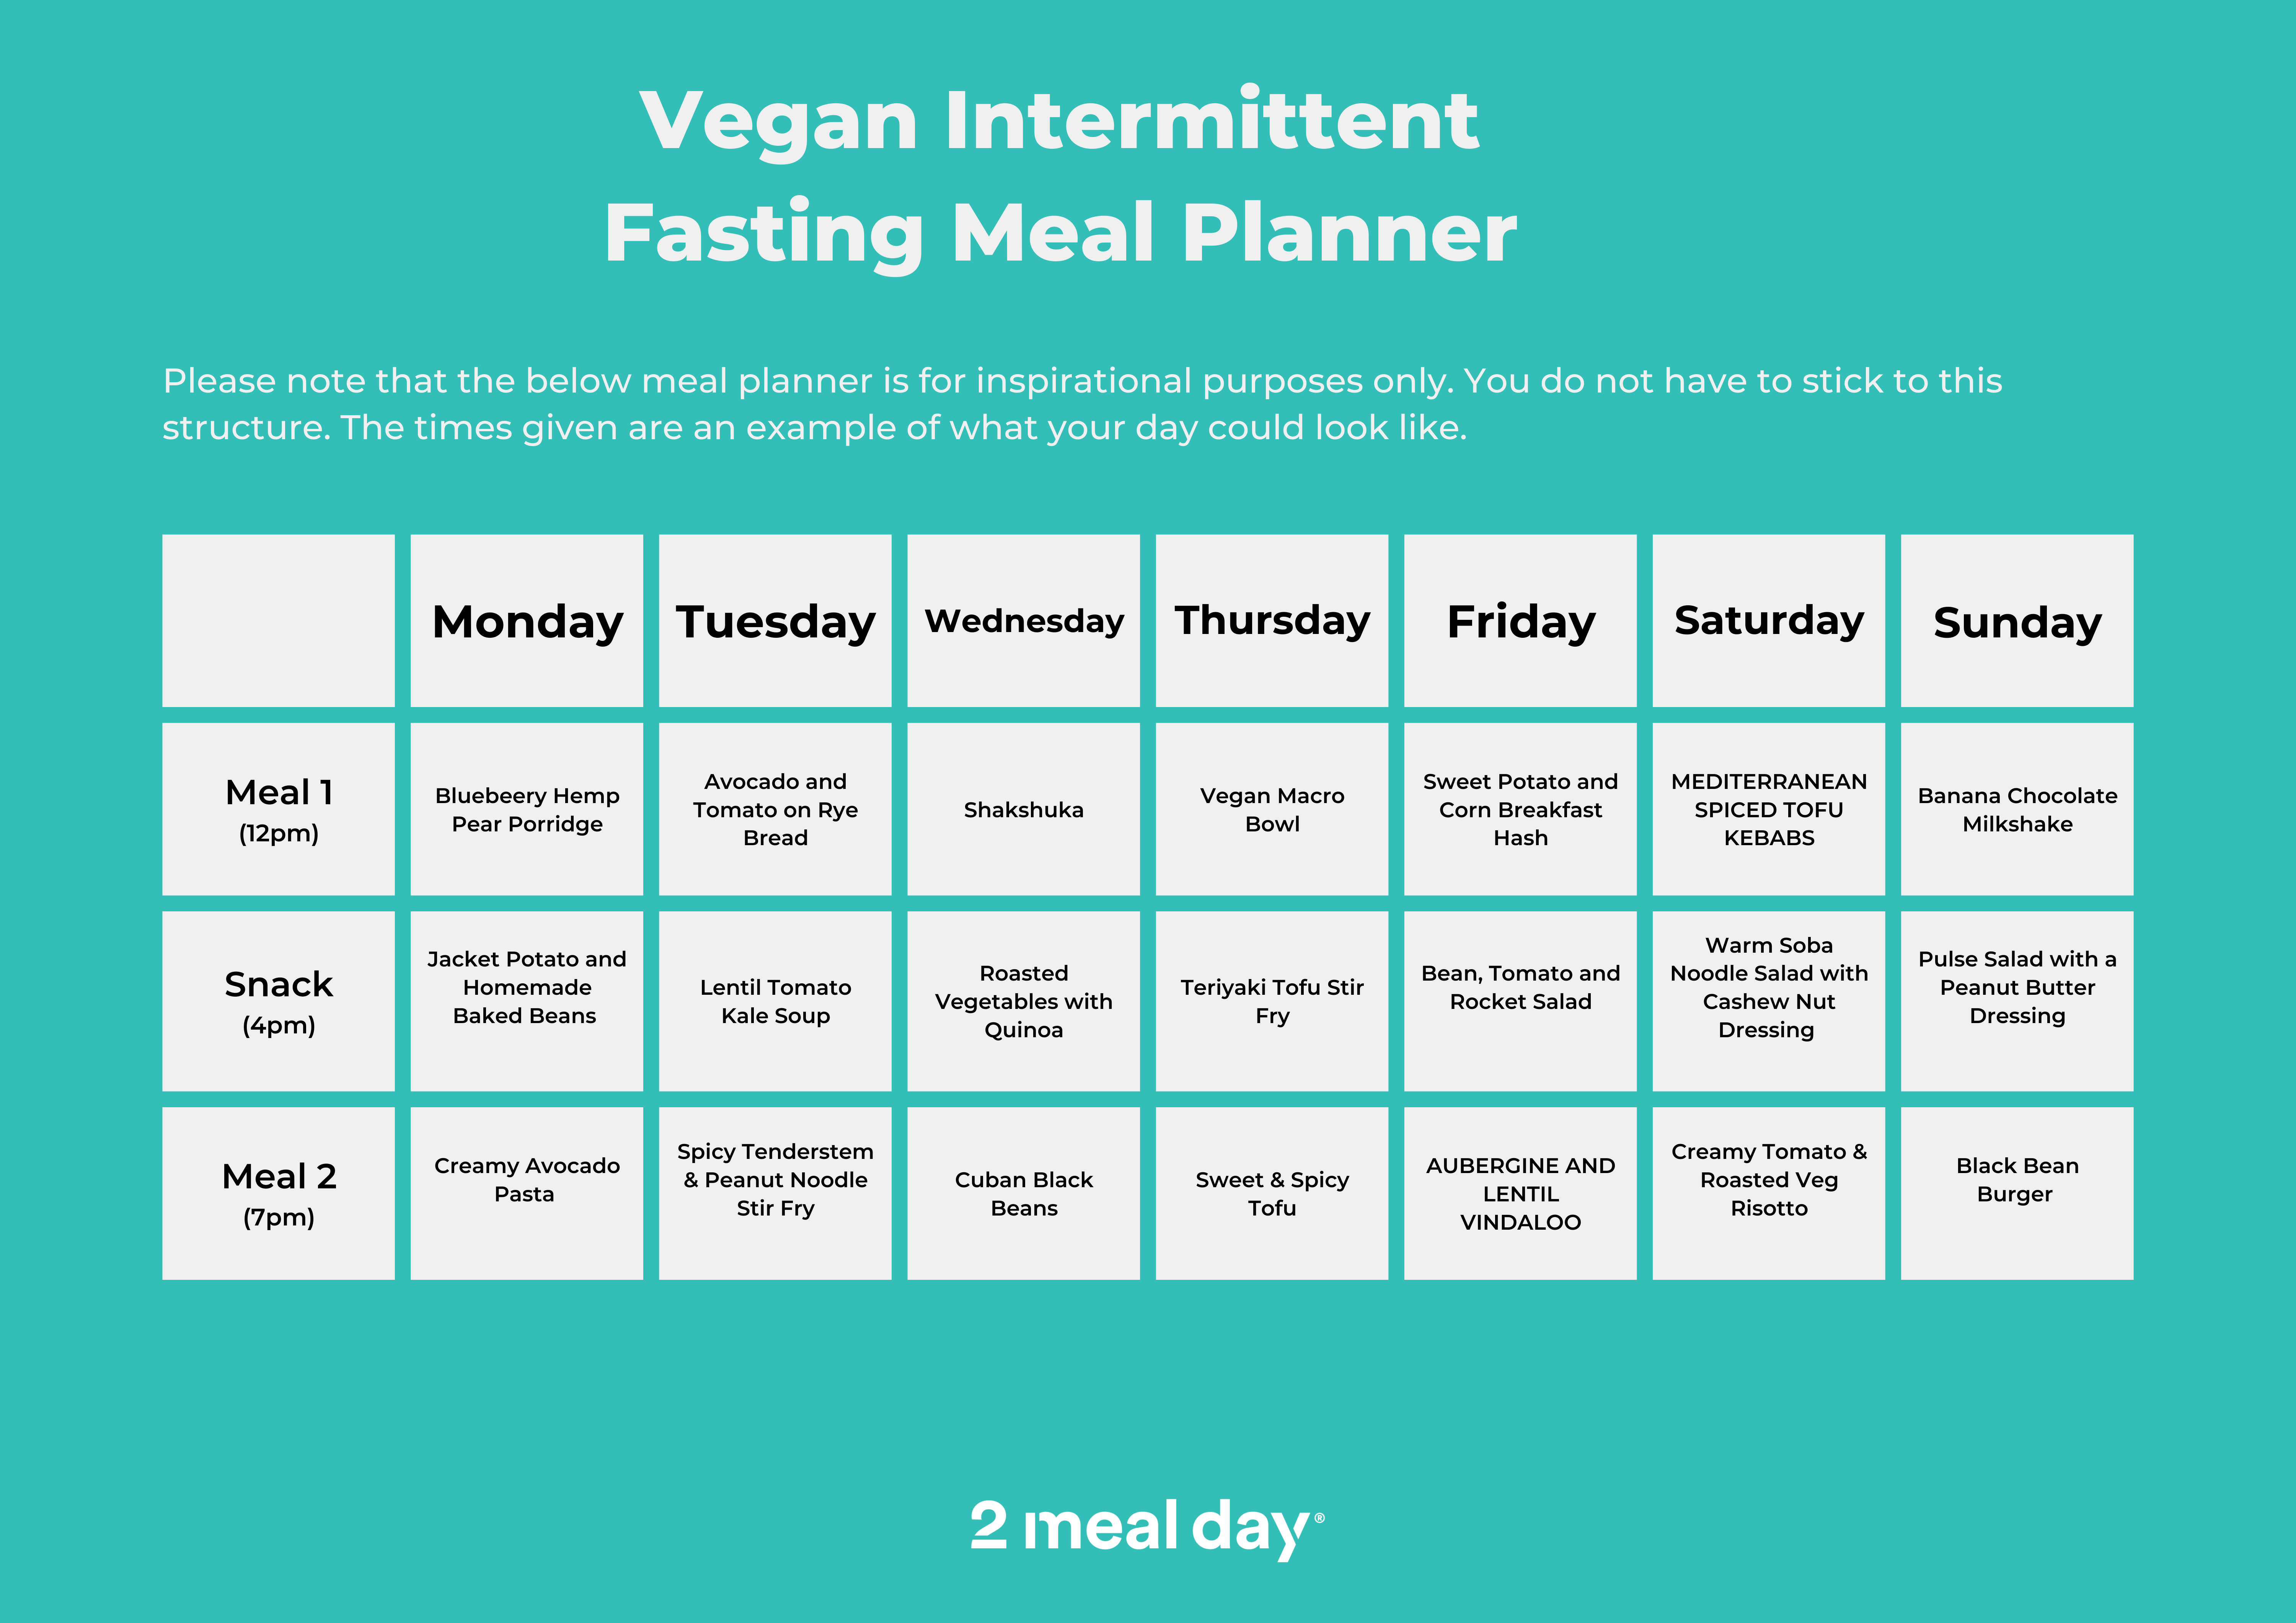 recommended-vegan-intermittent-fasting-meal-plans-2-meal-day